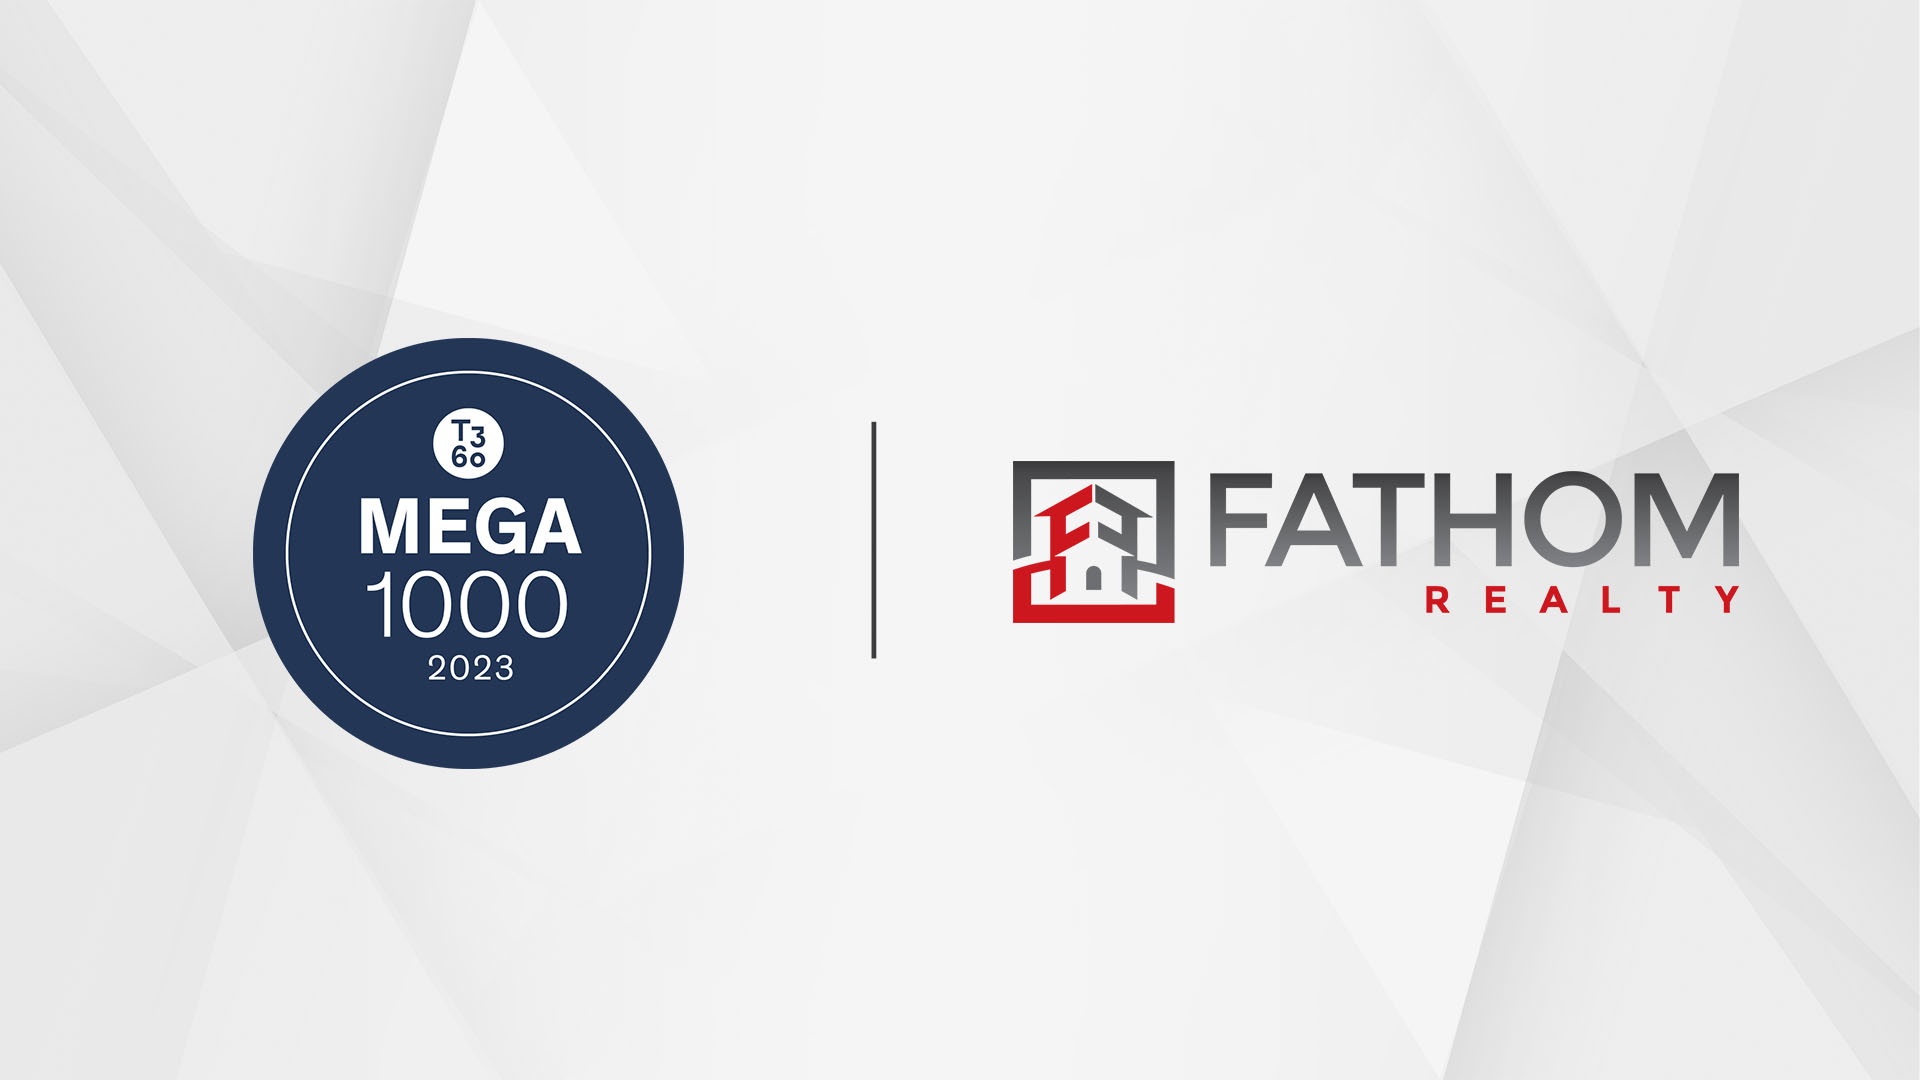 Featured image for “Fathom Realty Ranks Among Top Modern Brokerages in T3 Sixty MEGA 1000”